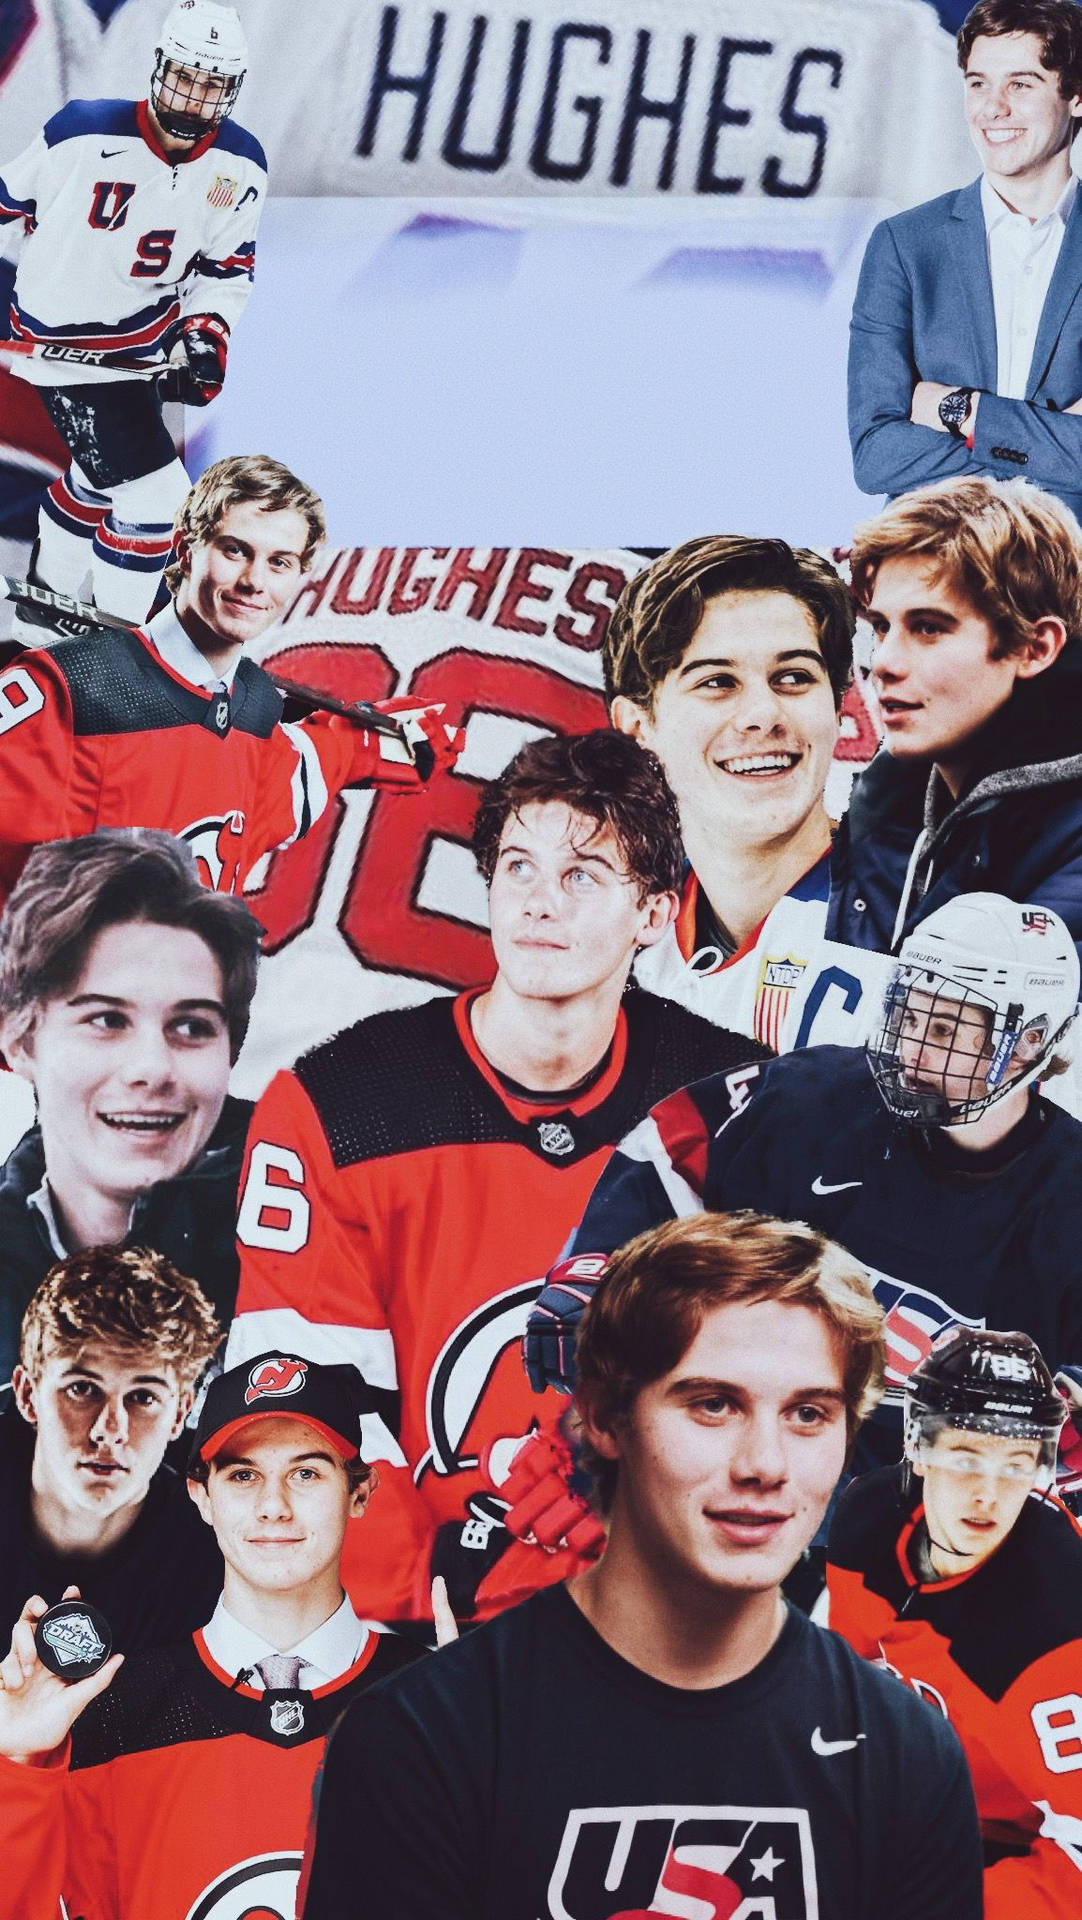 "Professional Ice Hockey Player Jack Hughes in Action" Wallpaper